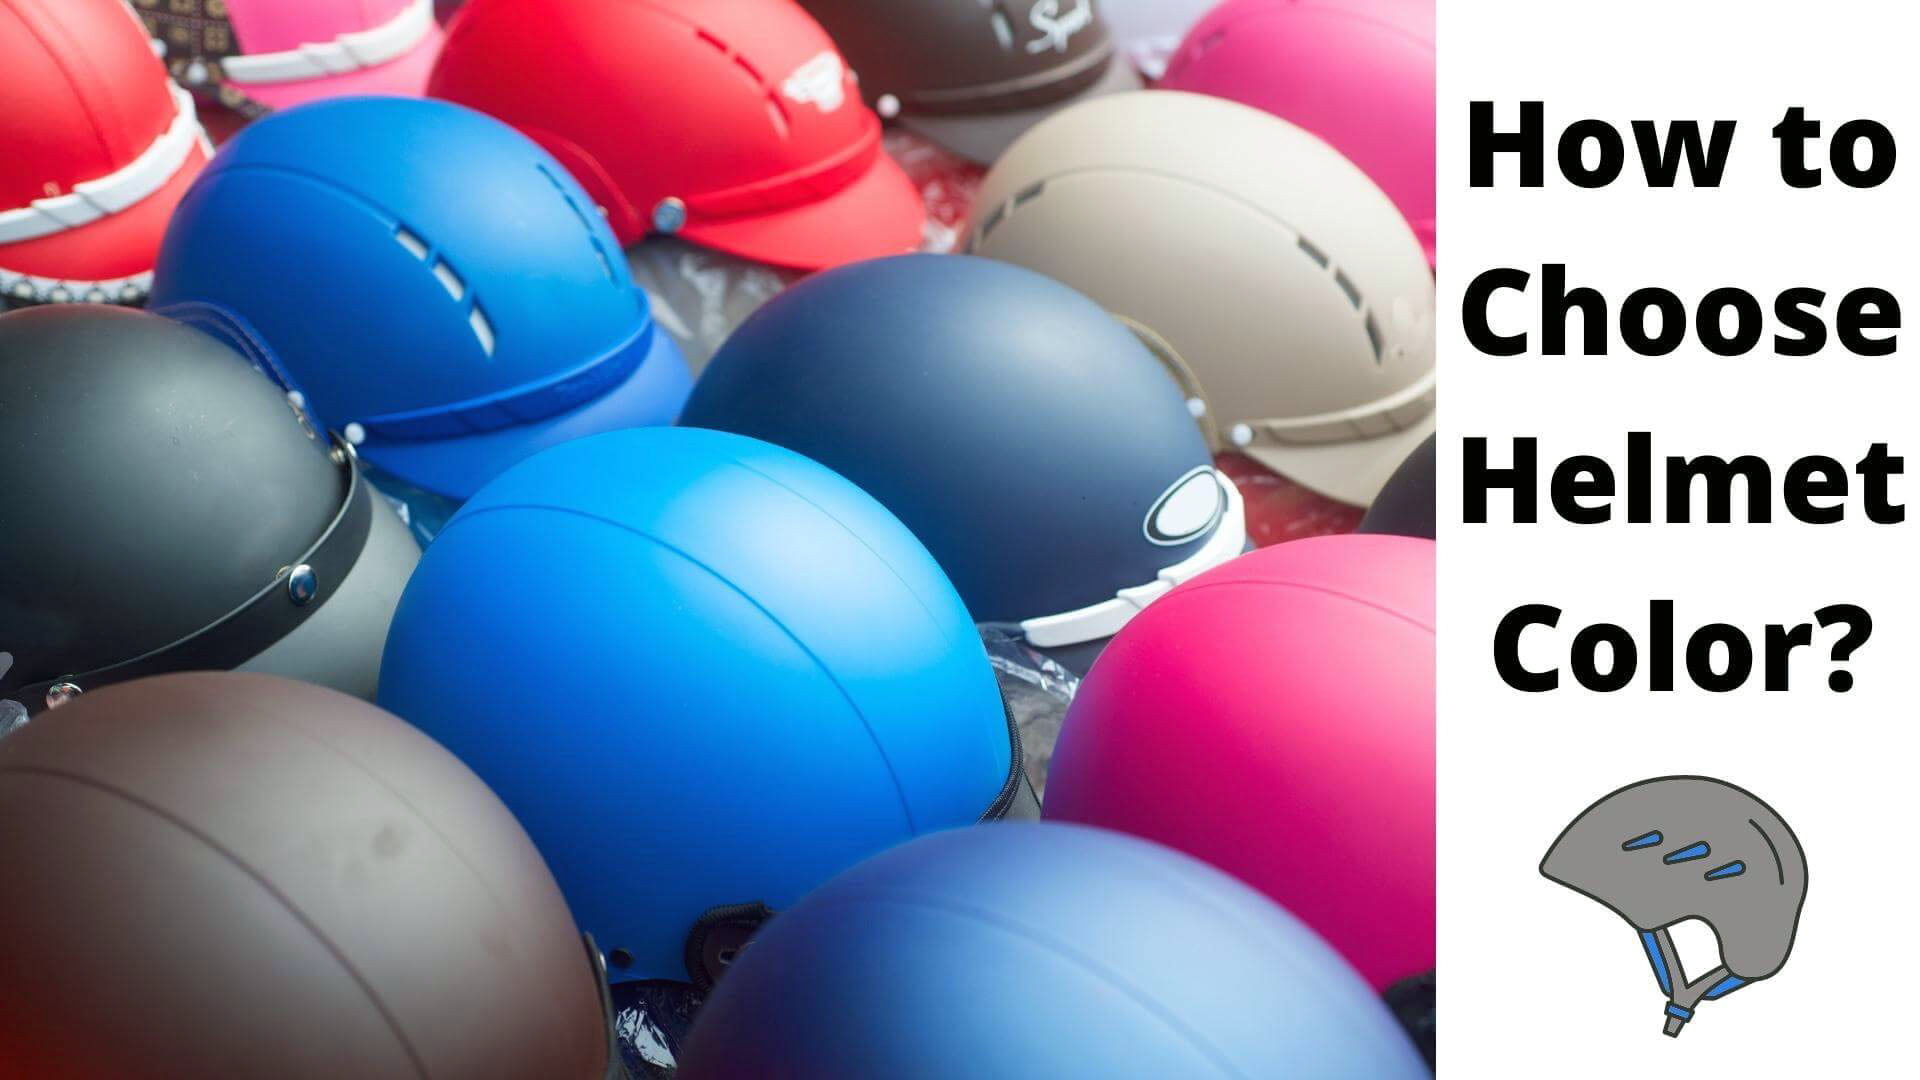 How to Choose Helmet Color For Your Riding Style